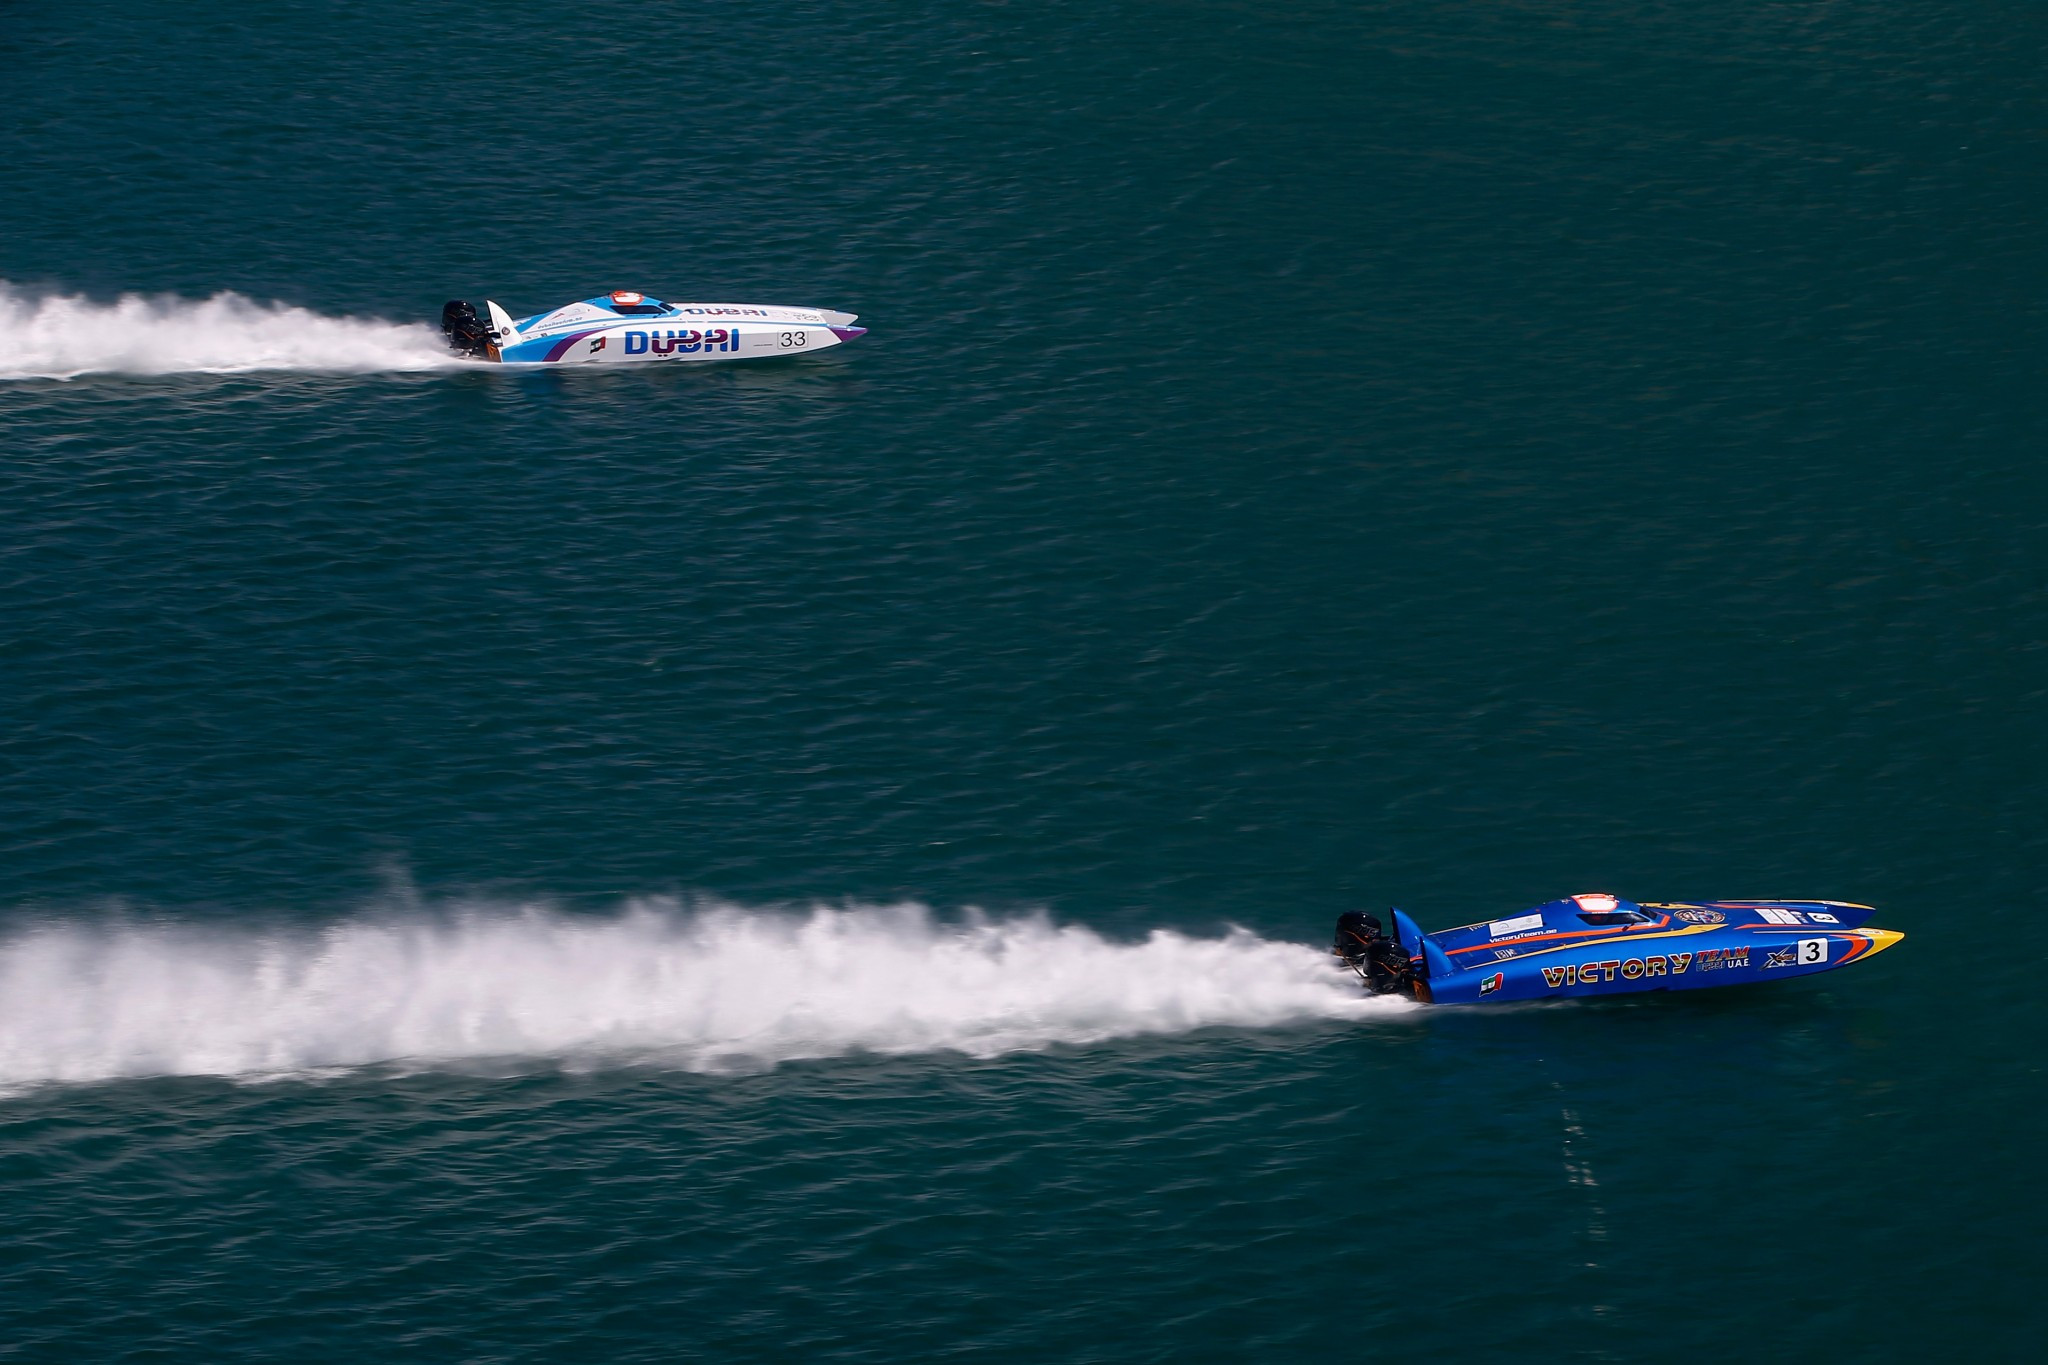 China and the UAE will host XCAT World Championship events ©Getty Images